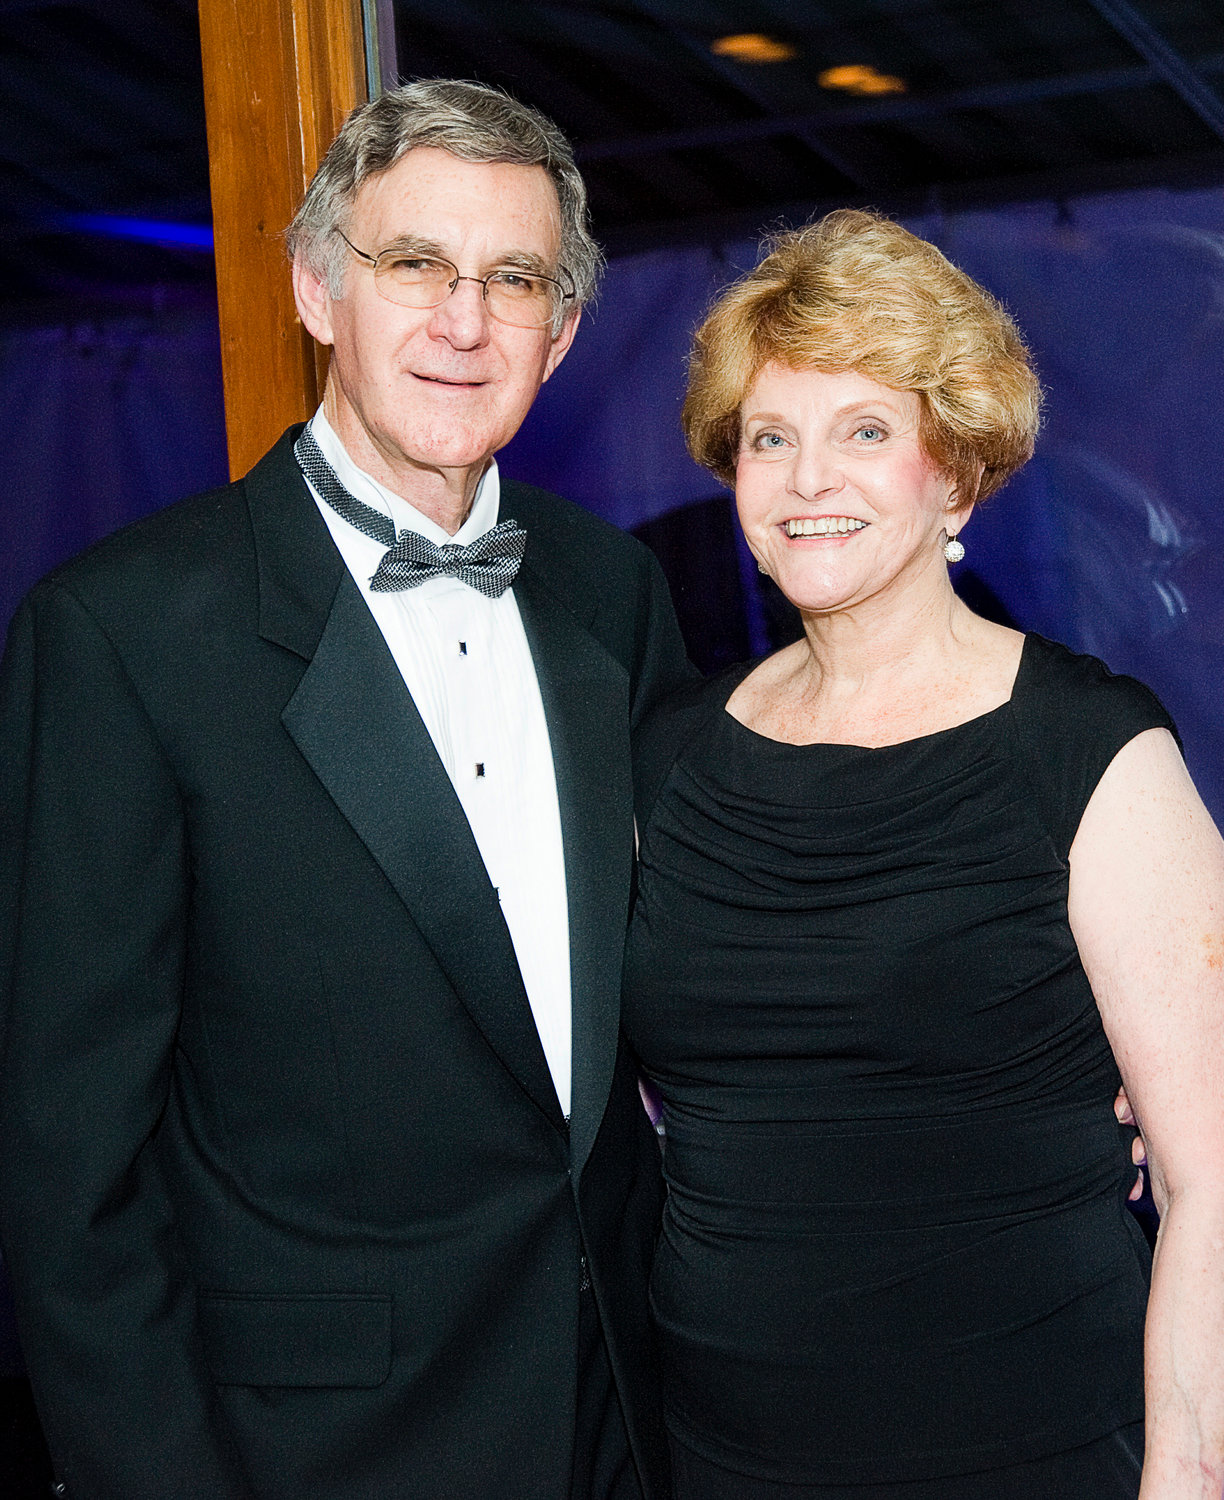 Tony and Ann Cimaglia are donating more than $500,000 to Cape Fear Valley Health Foundation’s Caring for the Future campaign to expand care for neurological diseases, with an emphasis on Parkinson’s.